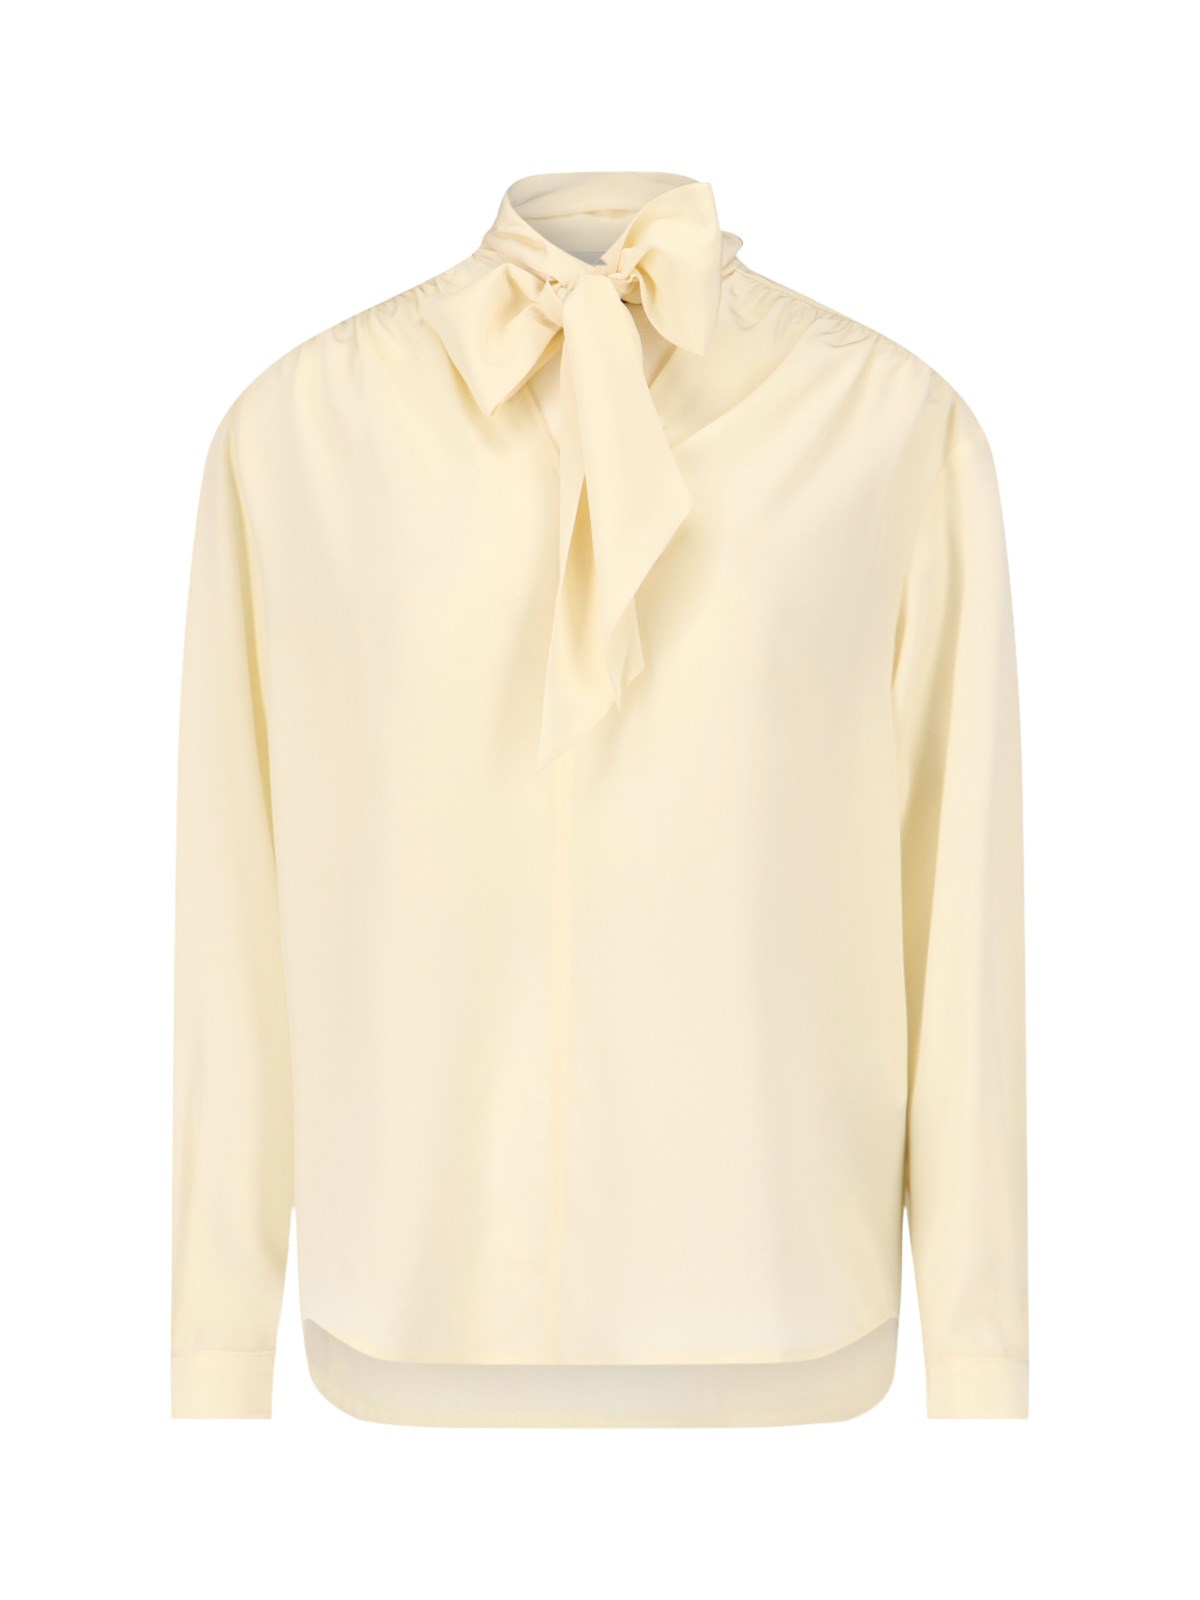 Gucci Bow Detail Top In Cream